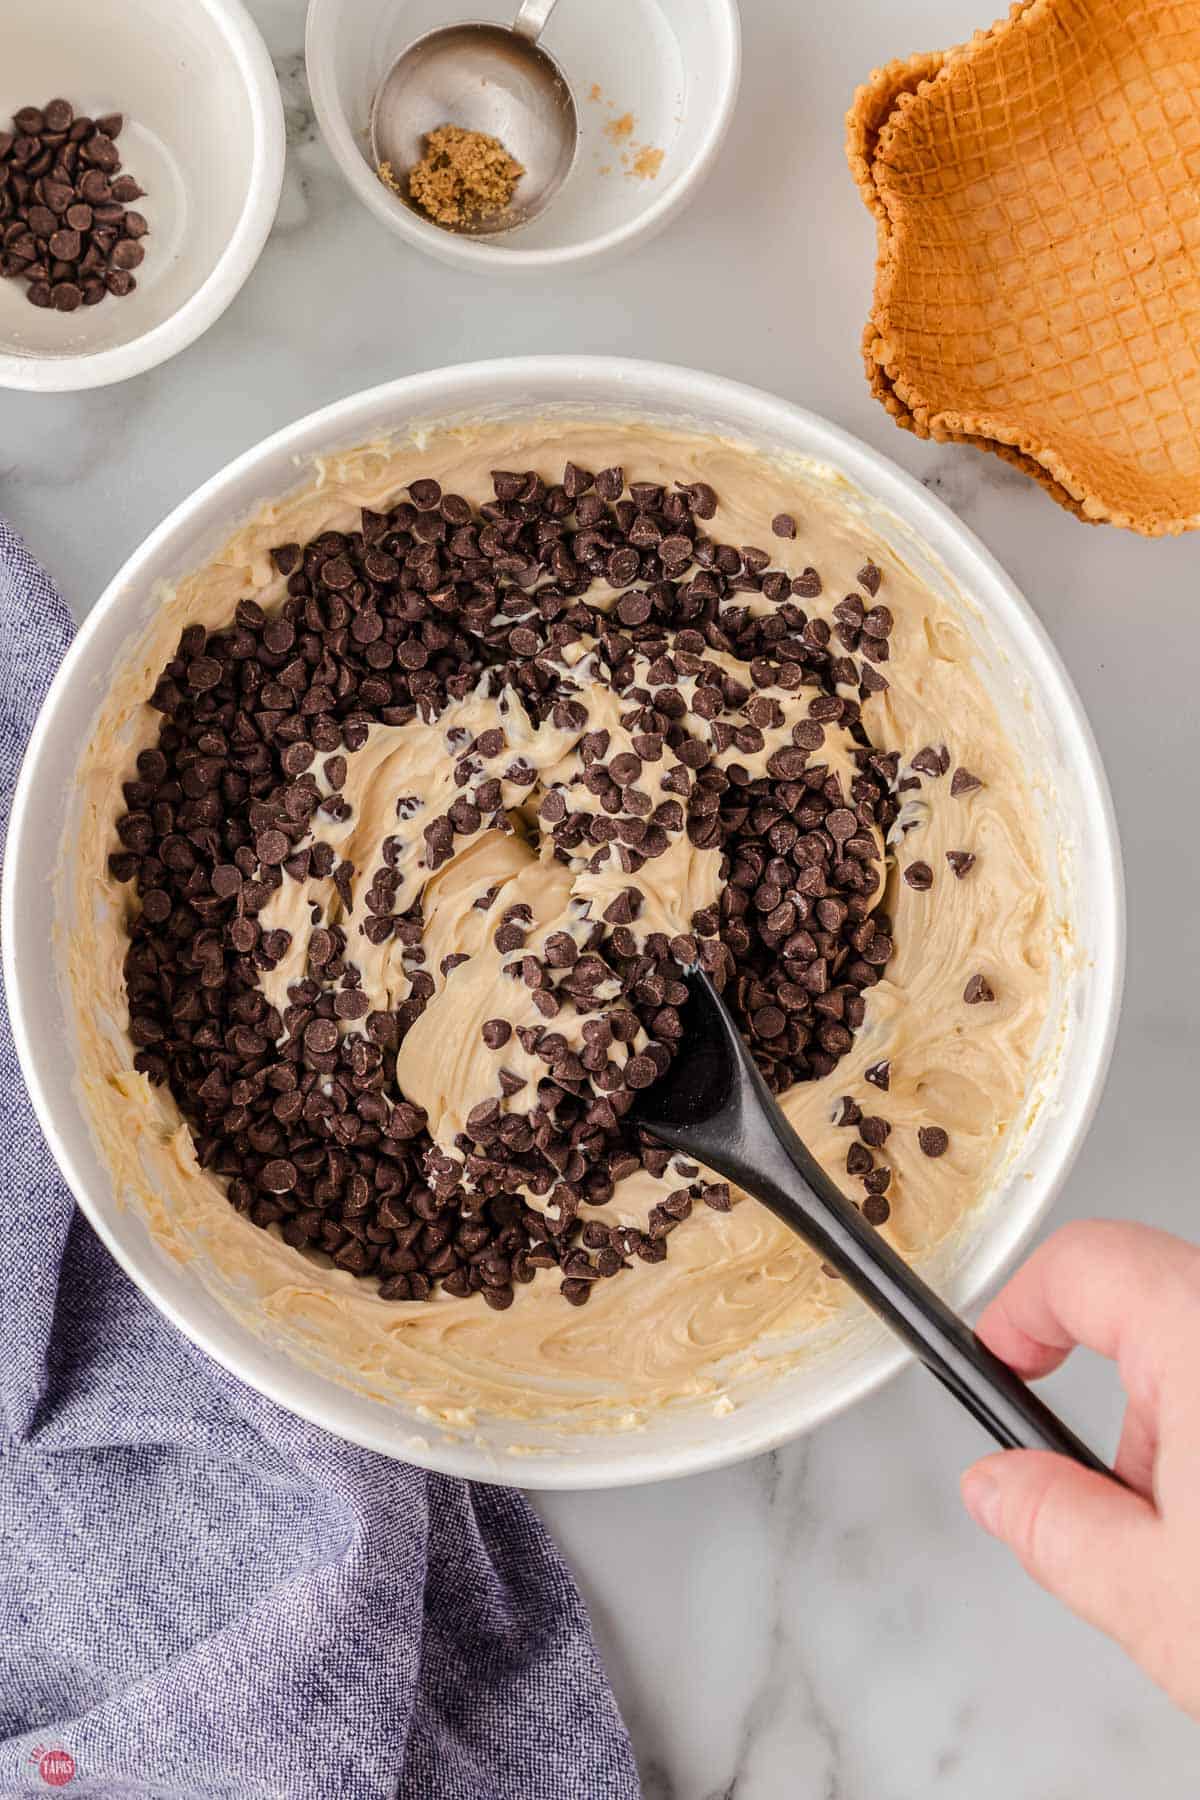 mix up this sweet dip with chocolate chips